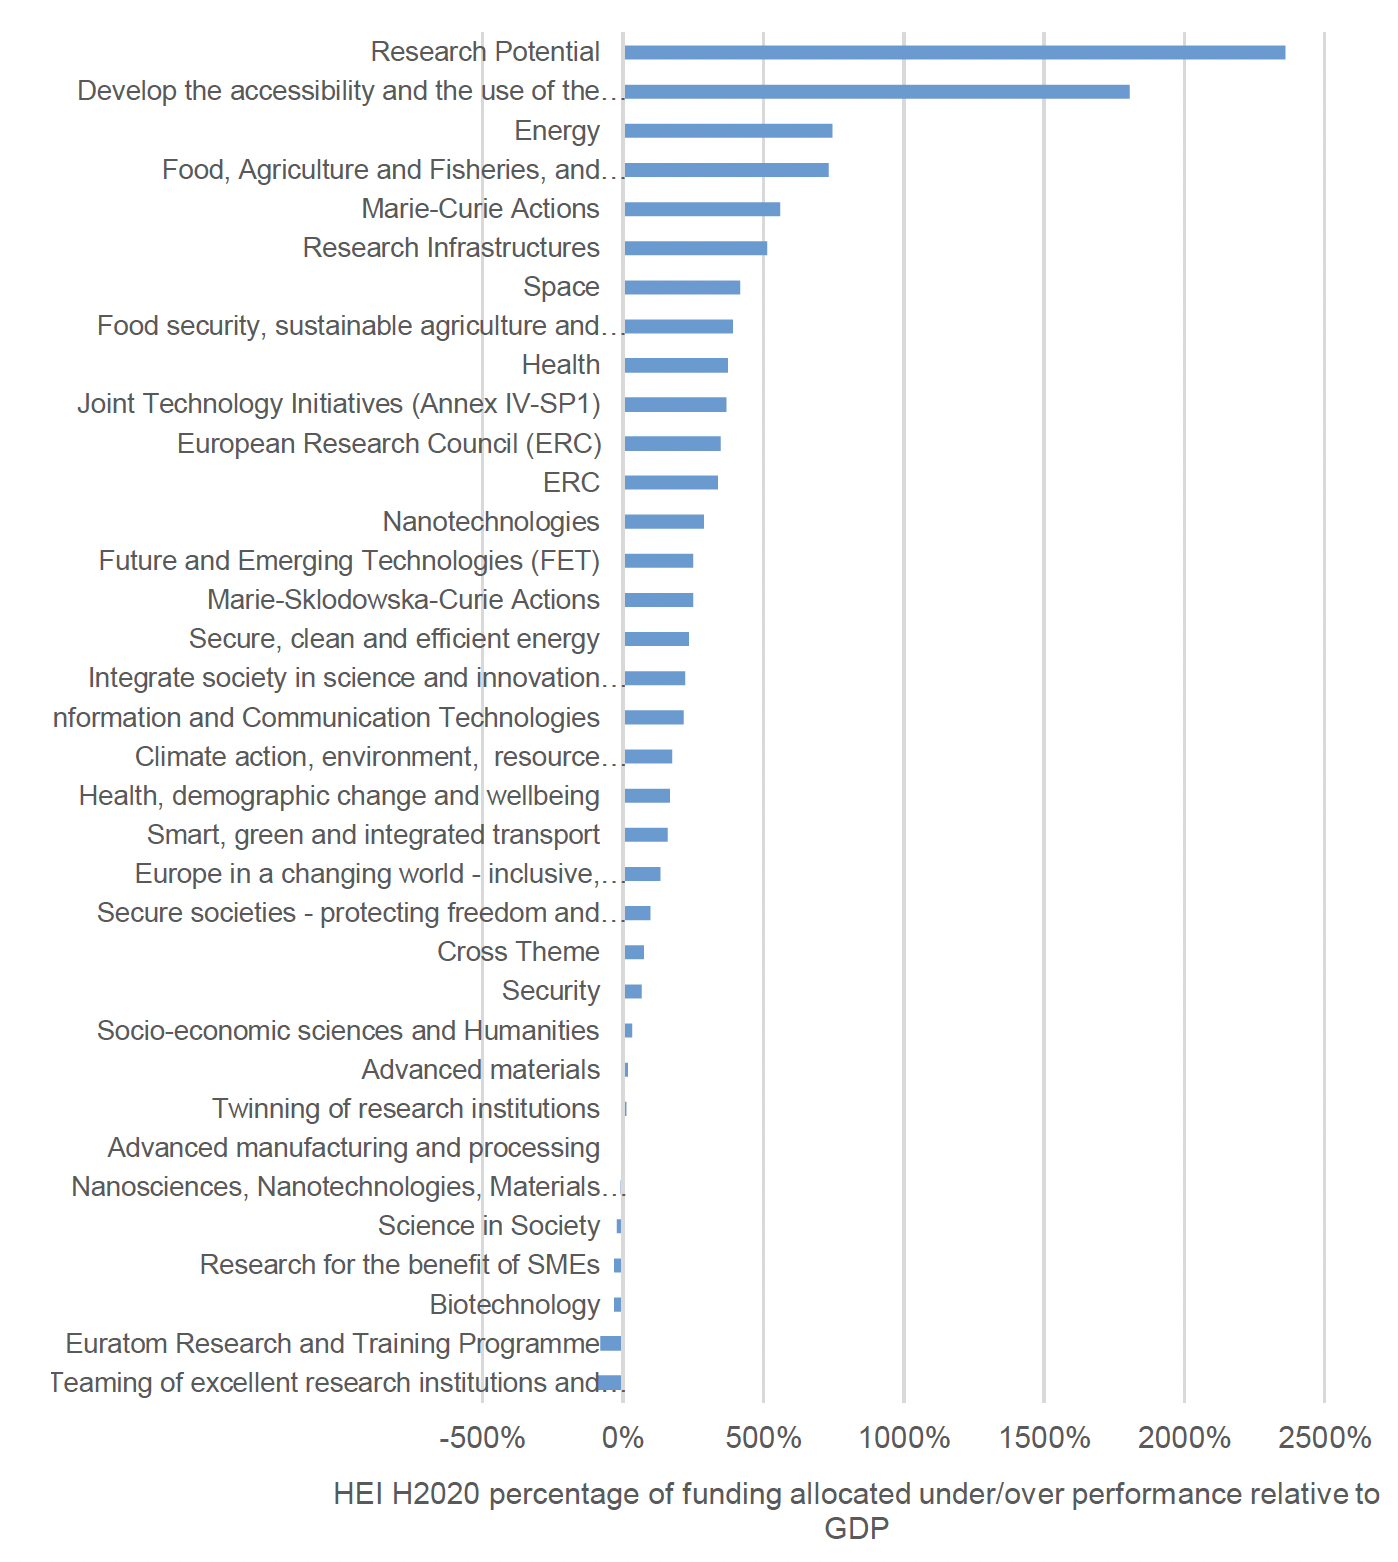 figure 18 shows the research outputs of higher education research institutions, in terms of research output by type, across a set of composite sectors such as 'mathematics & computing.' Publications are by far and away the largest output, with products and spin-outs, data outputs and intellectual property lagging far behind.